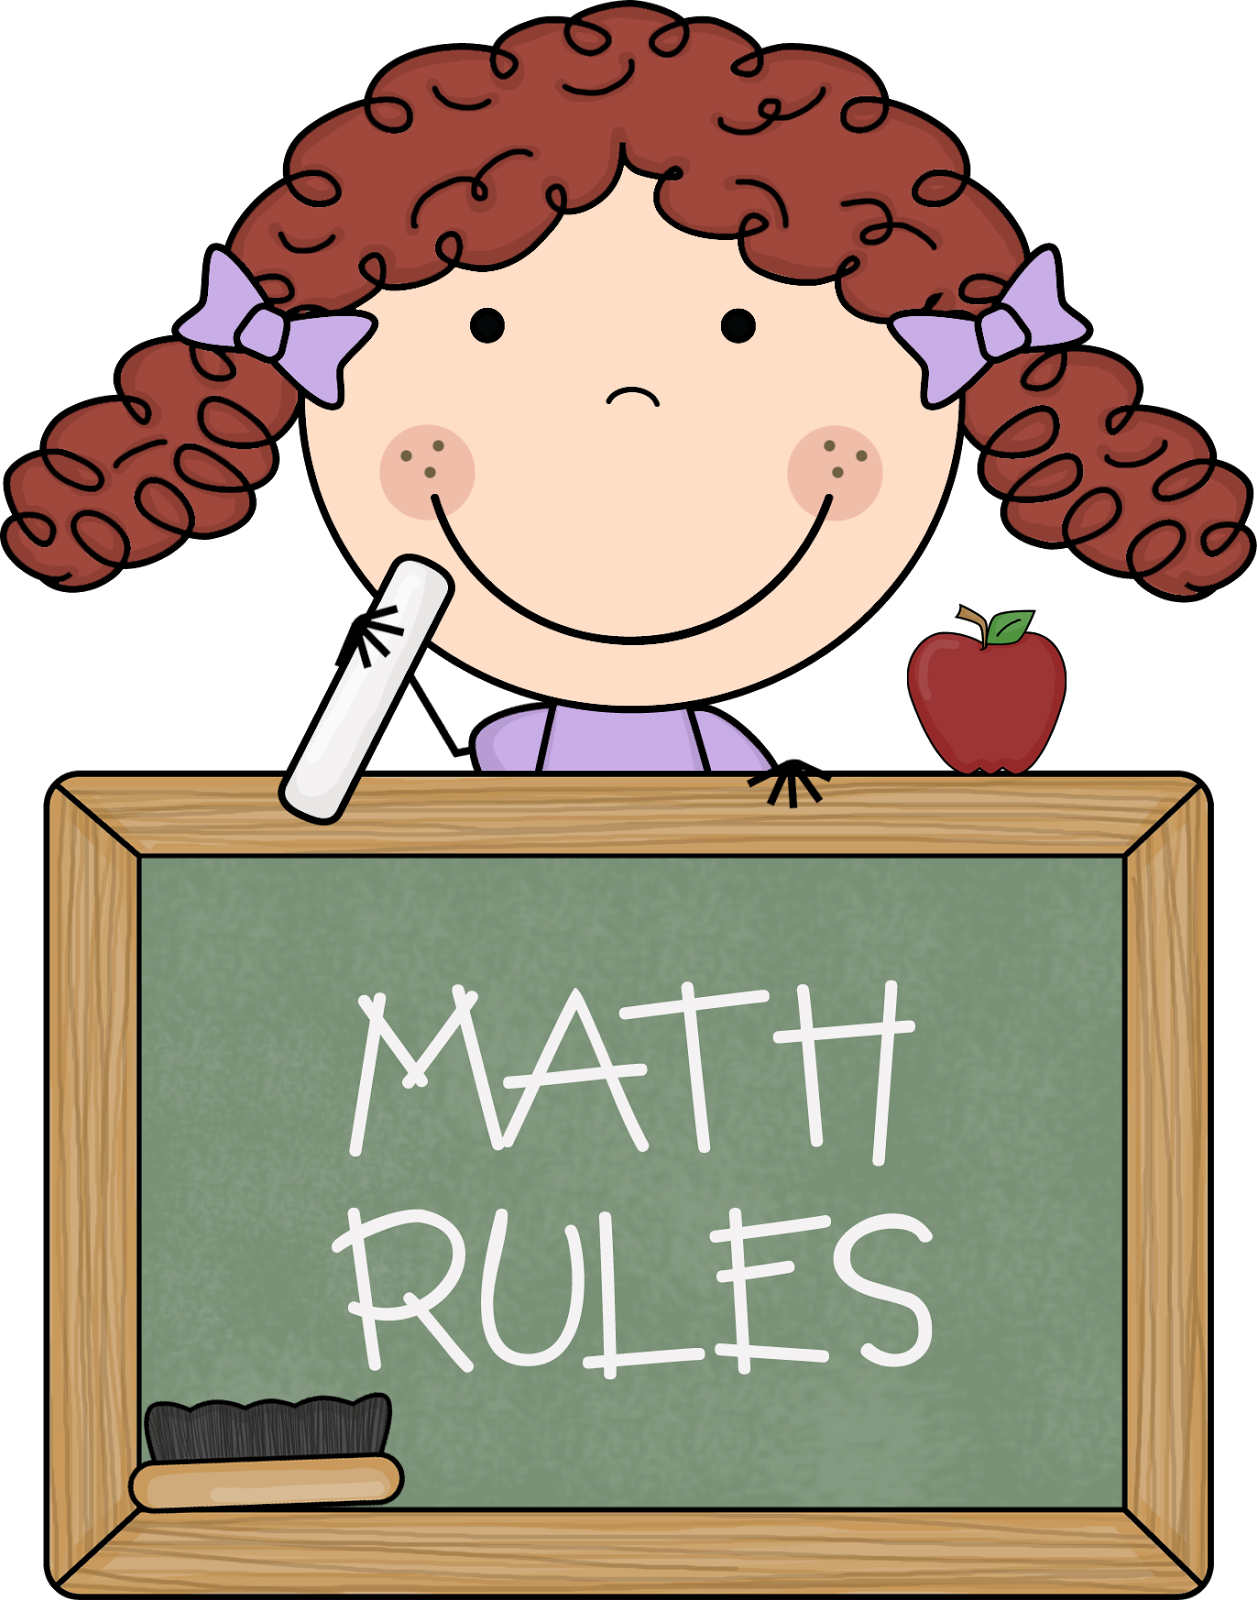 34 Pictures Of Kids Doing Math Free Cliparts That You Can Download To